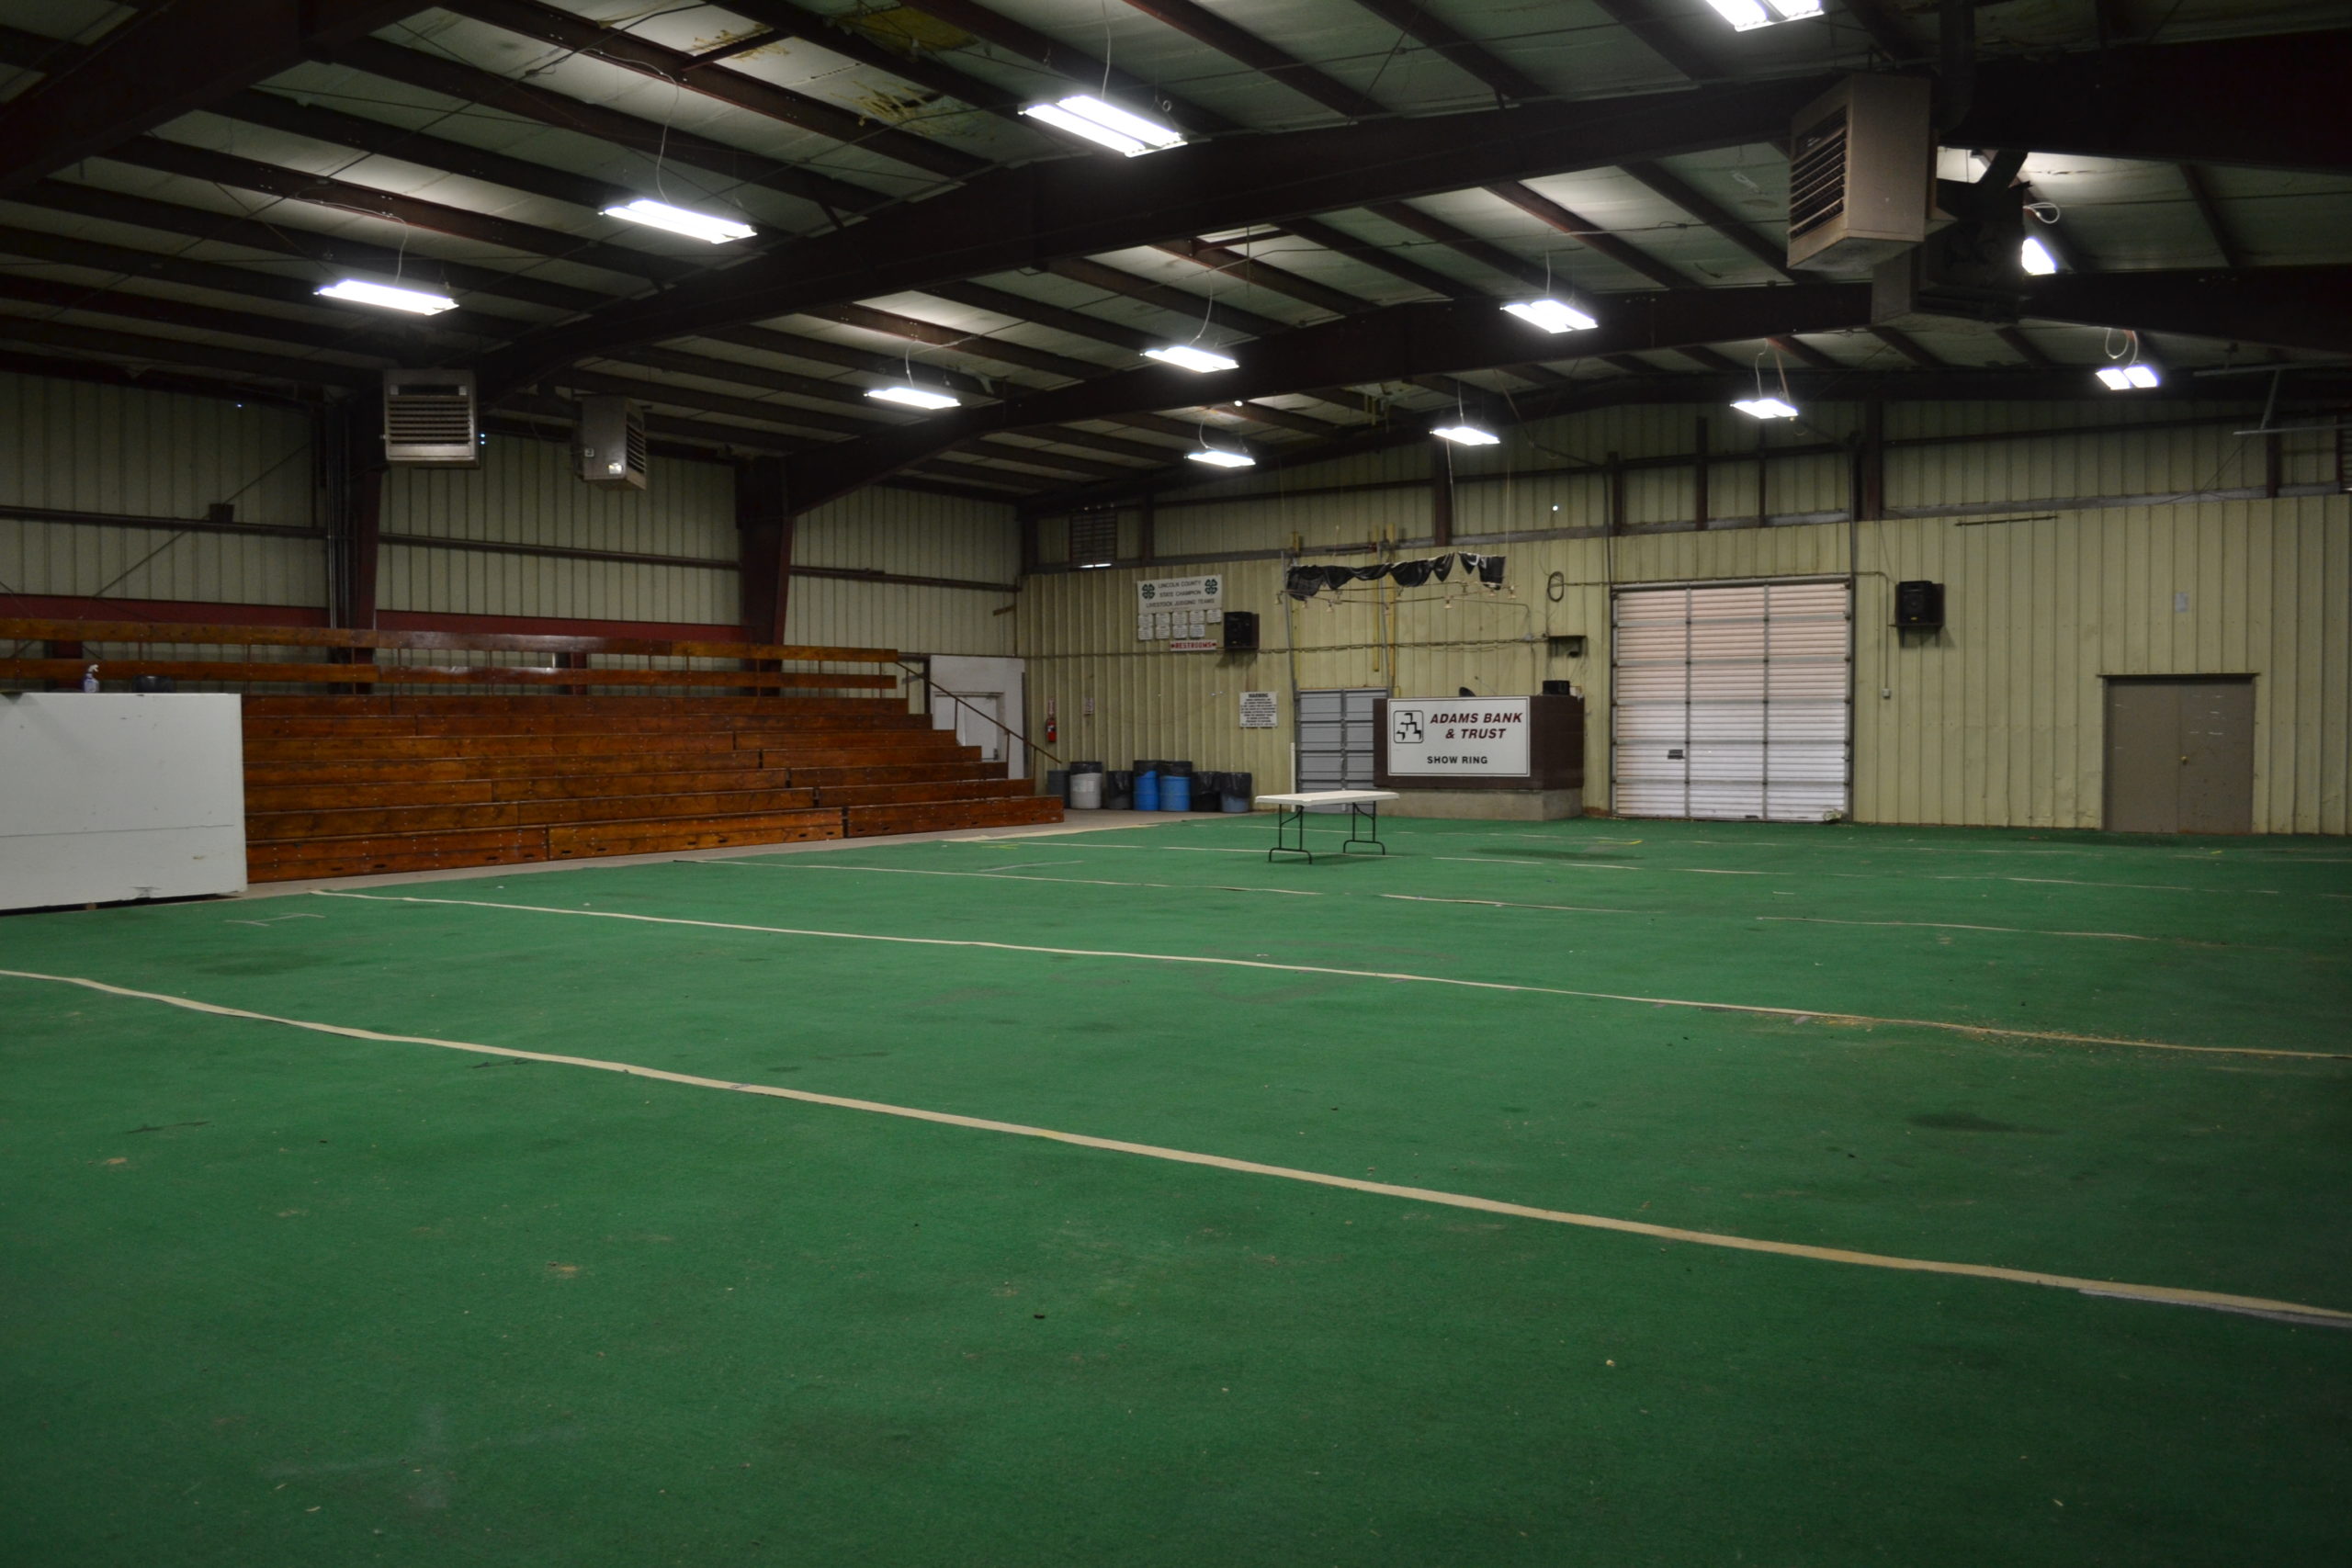 lincoln county fair, fair, beef barn, arena, facility, north platte, ne, lincoln county, nebraska, north platte area sports commission, play north platte, convention, meeting space